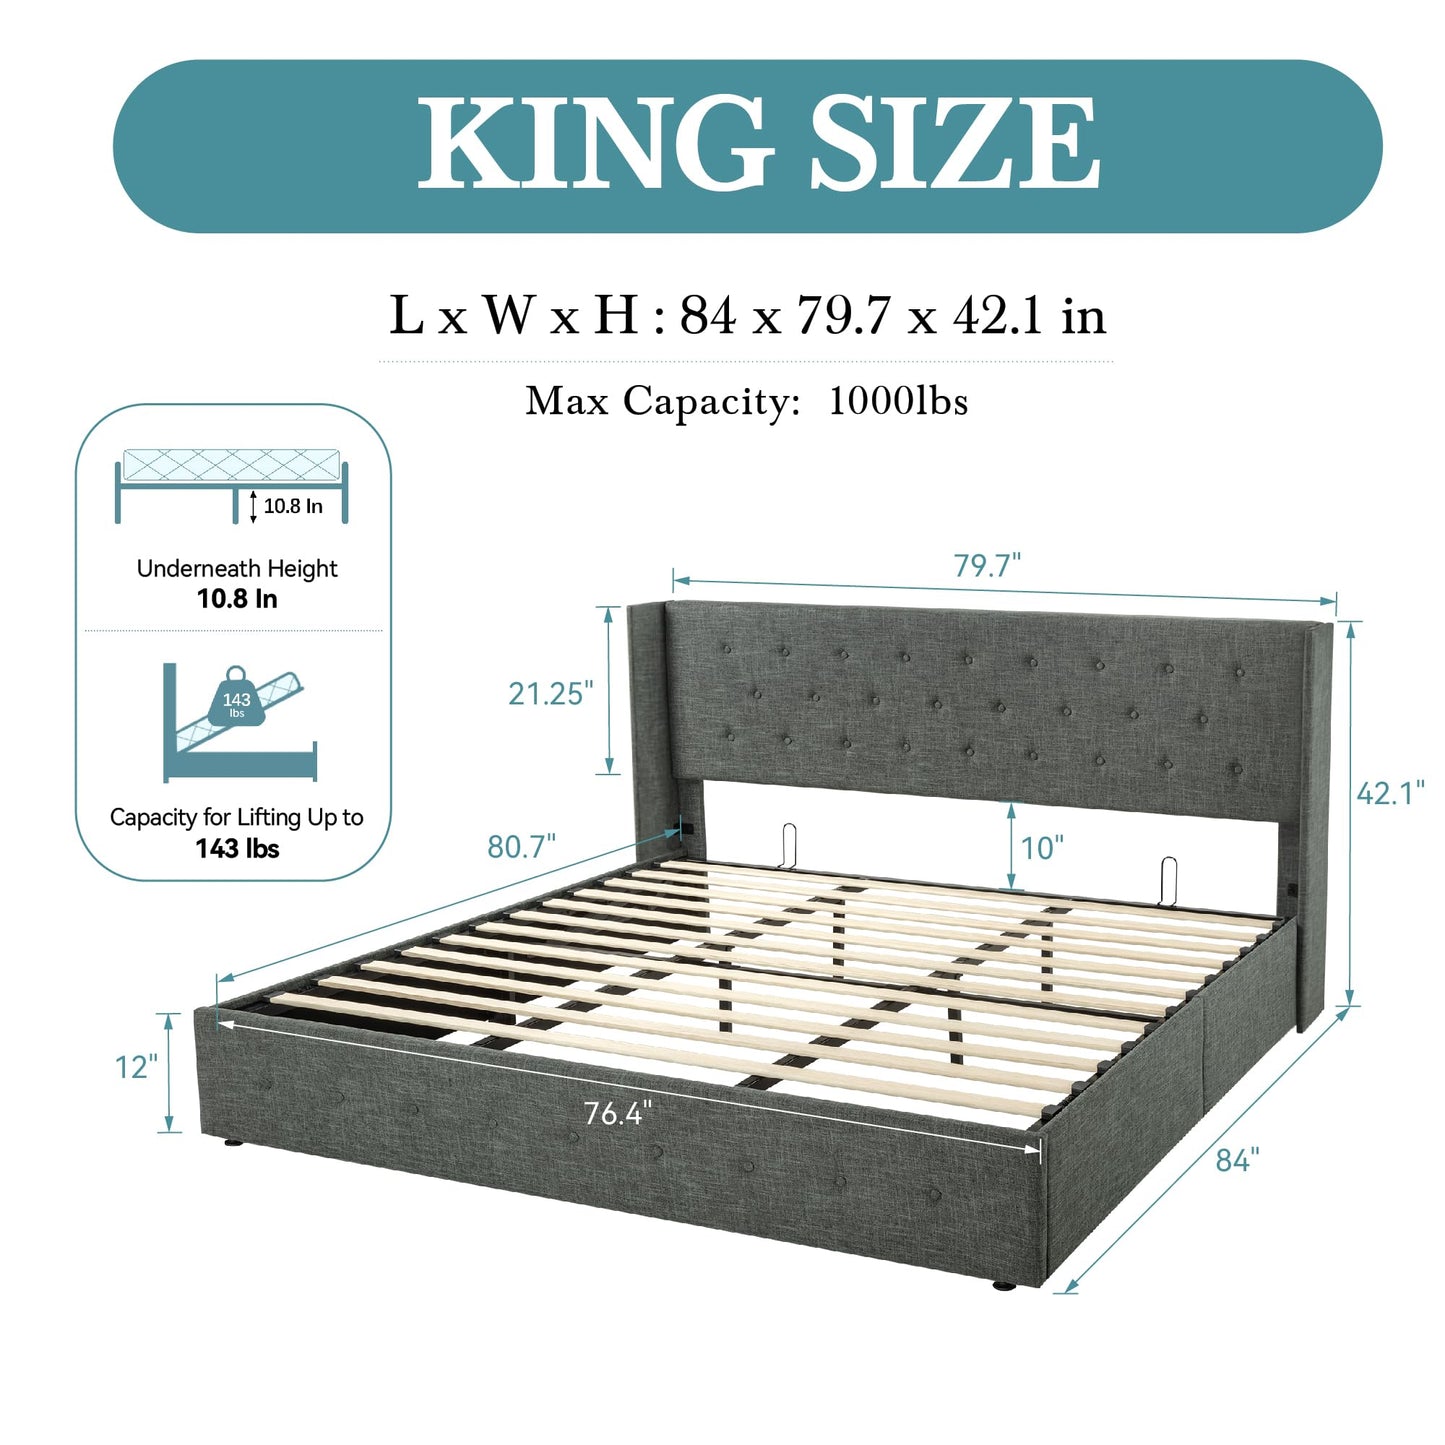 HOOMIC King Size Lift Up Storage Bed with Wingback Headboard/Heavy-Duty Upholstered Platform Bed Frame/Hydraulic Bed/Large Under Storage/Strong Wooden Slats Support/Noise-Free/Dark Grey